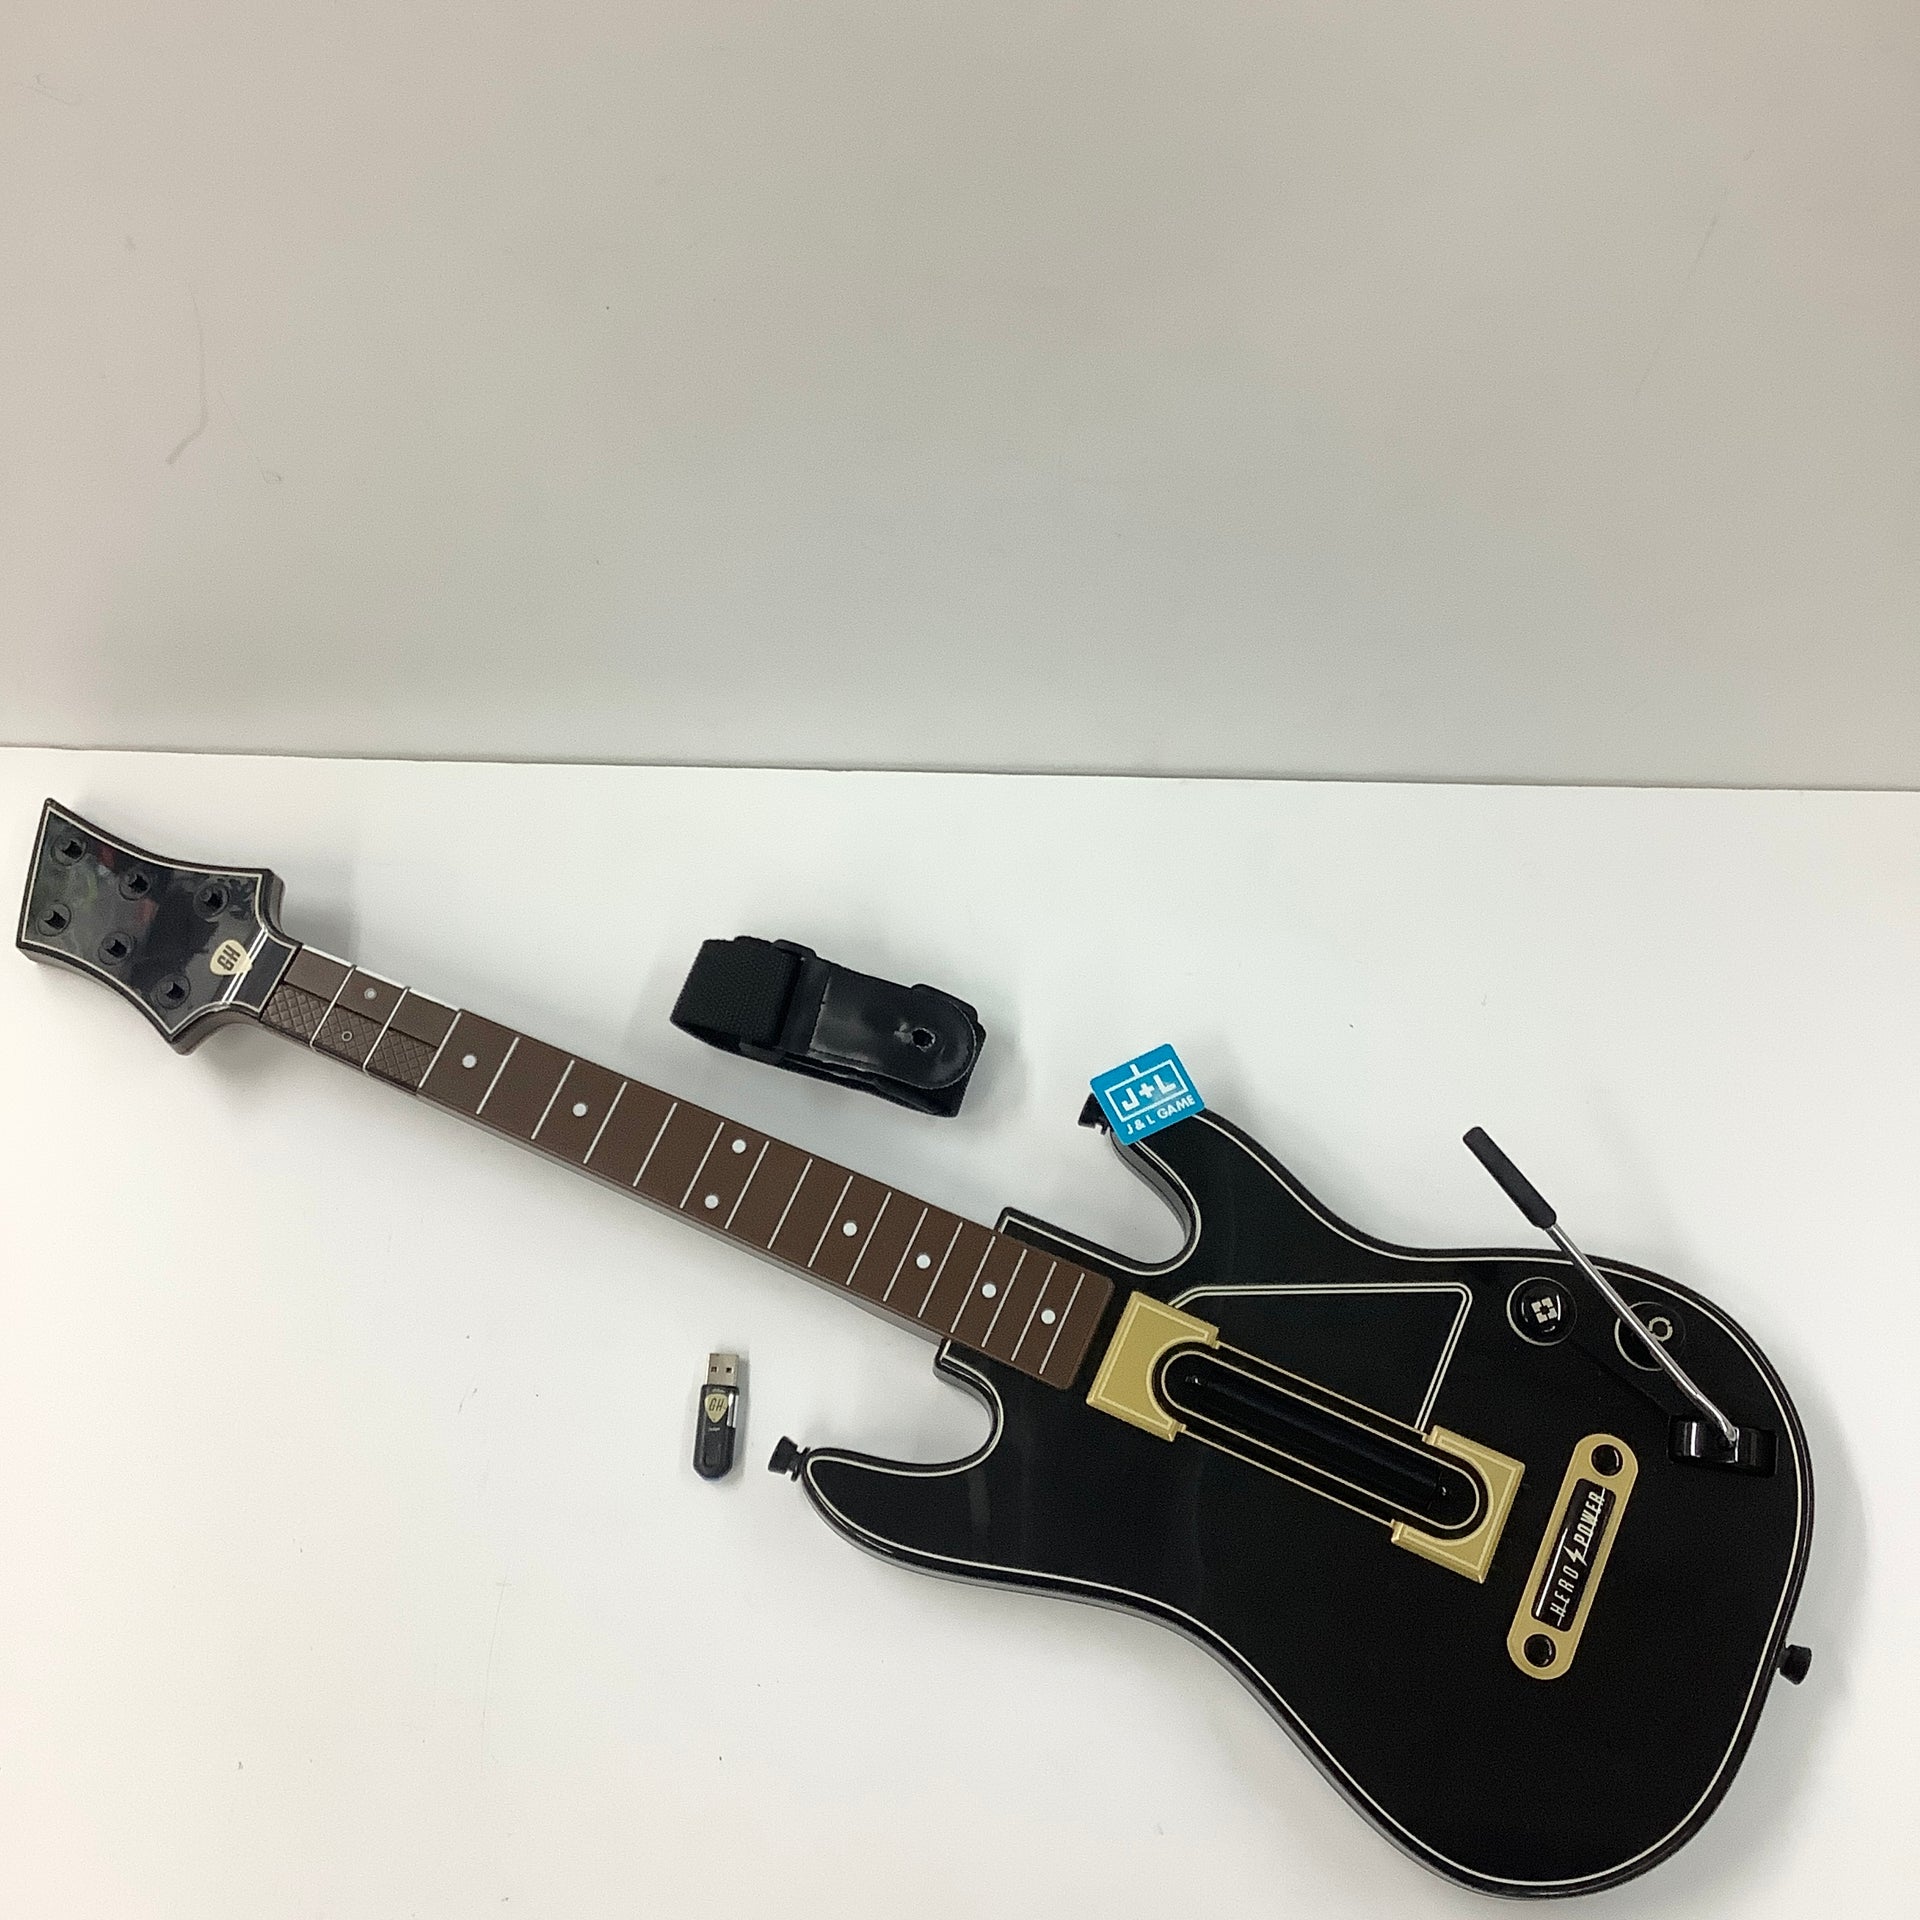 Guitar Hero Live - Guitar controller - 6 buttons - for Sony PlayStation 4